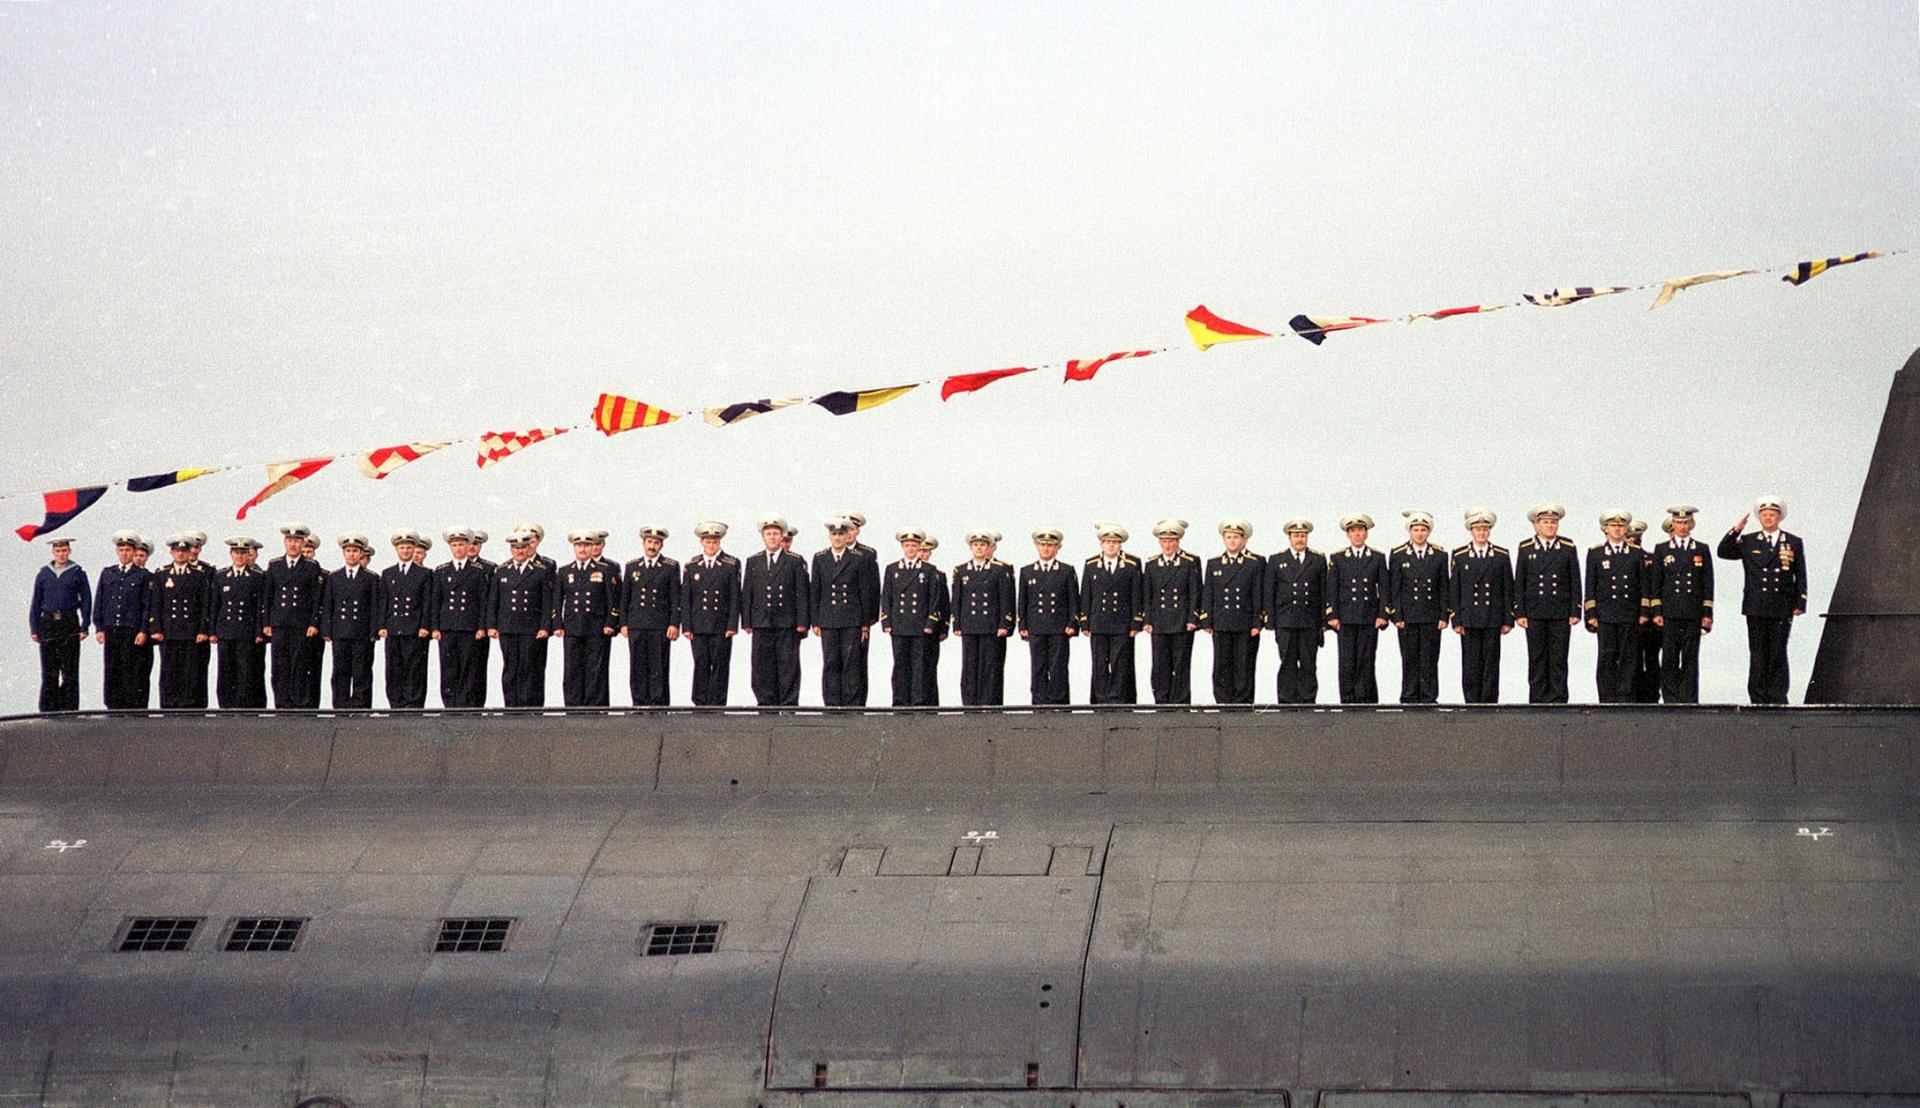 Sailors stand in a line atop their submarine in uniform